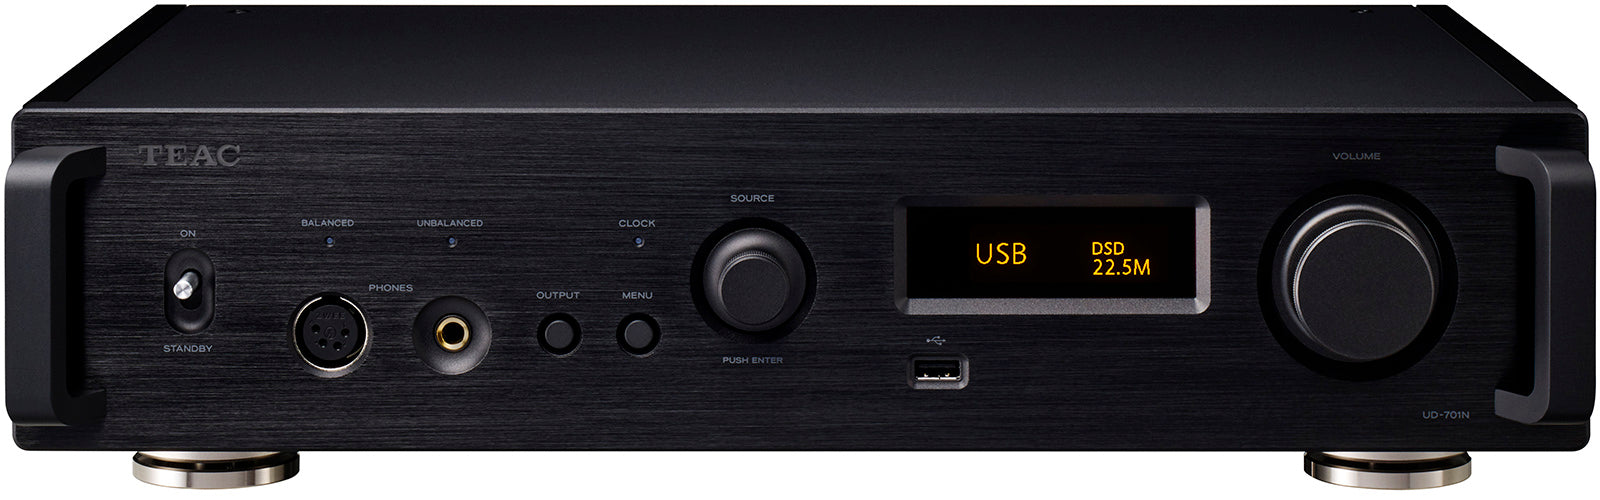 TEAC UD-701N USB DAC/Network Player Open Box - Safe and Sound HQ